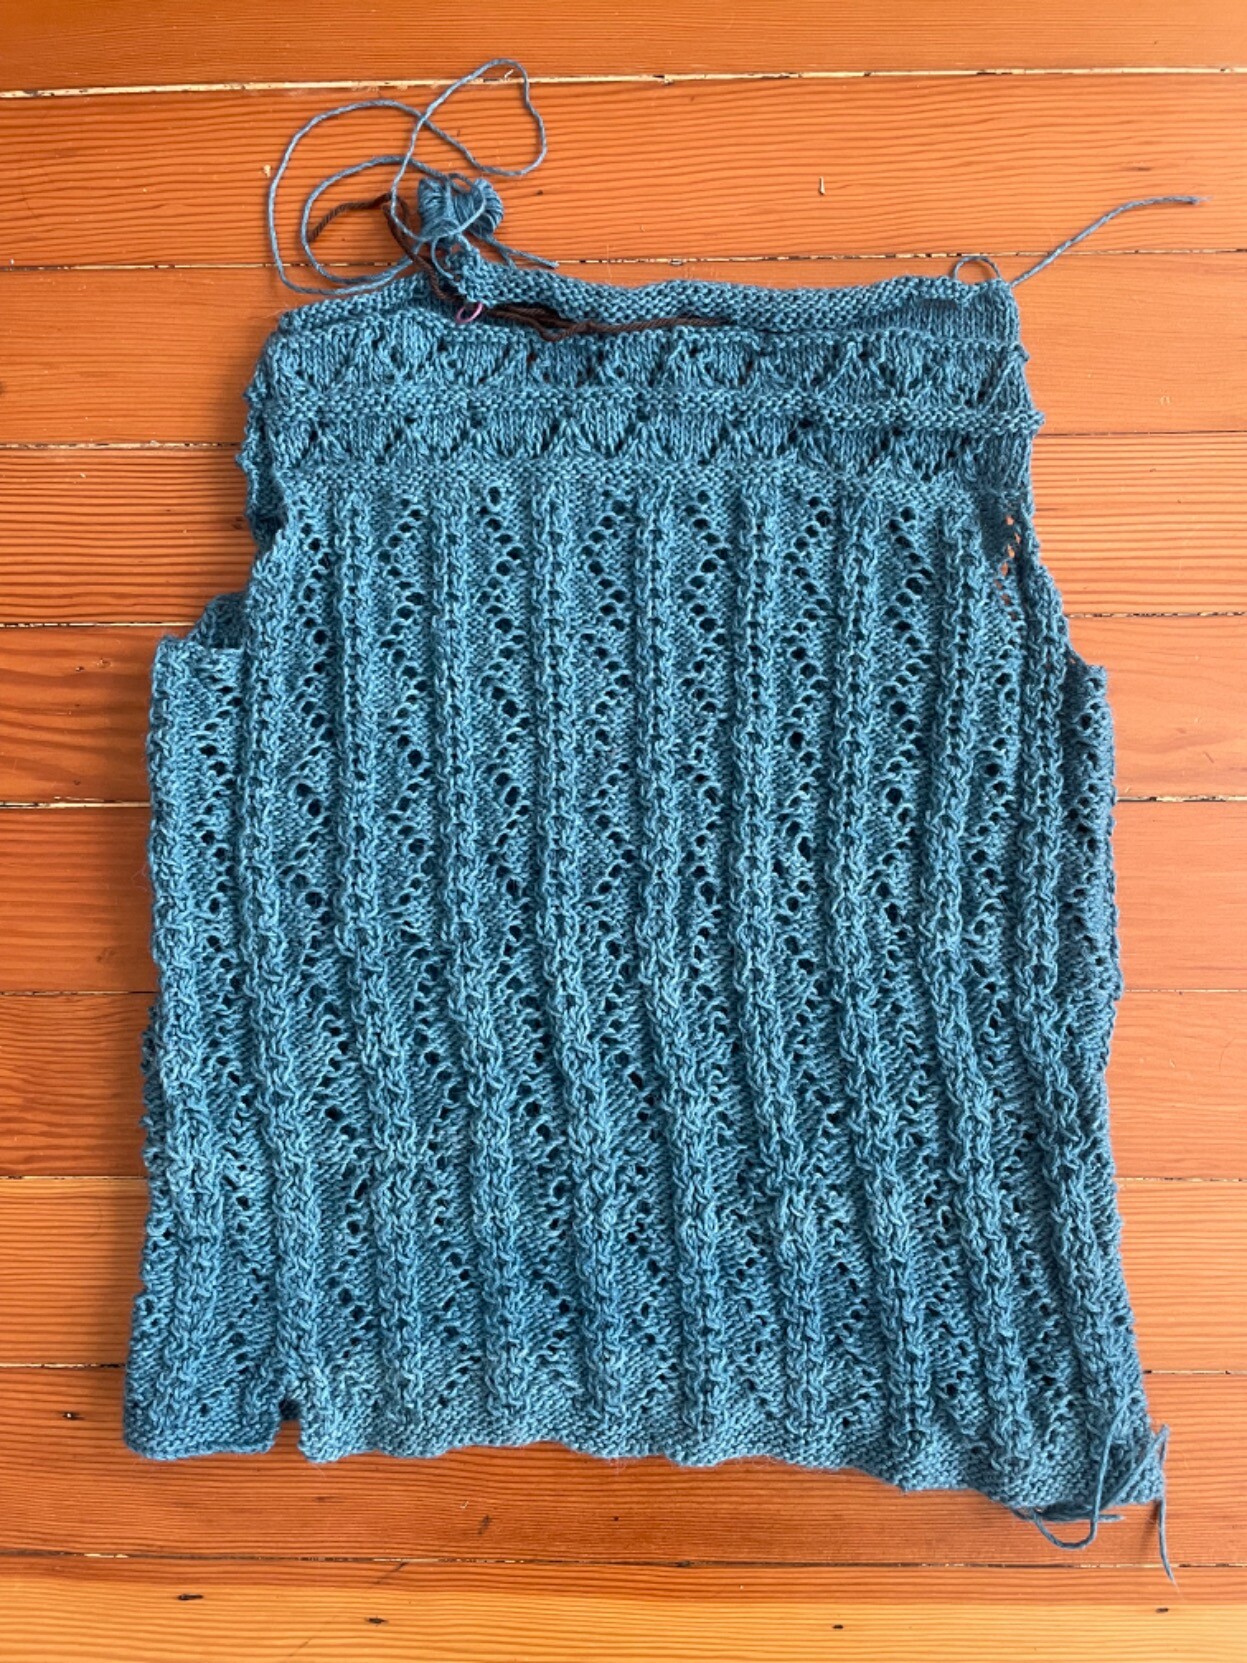 The body of a blue sweater with delicate cables and lace knitting. The sleeves and collar are not yet done.